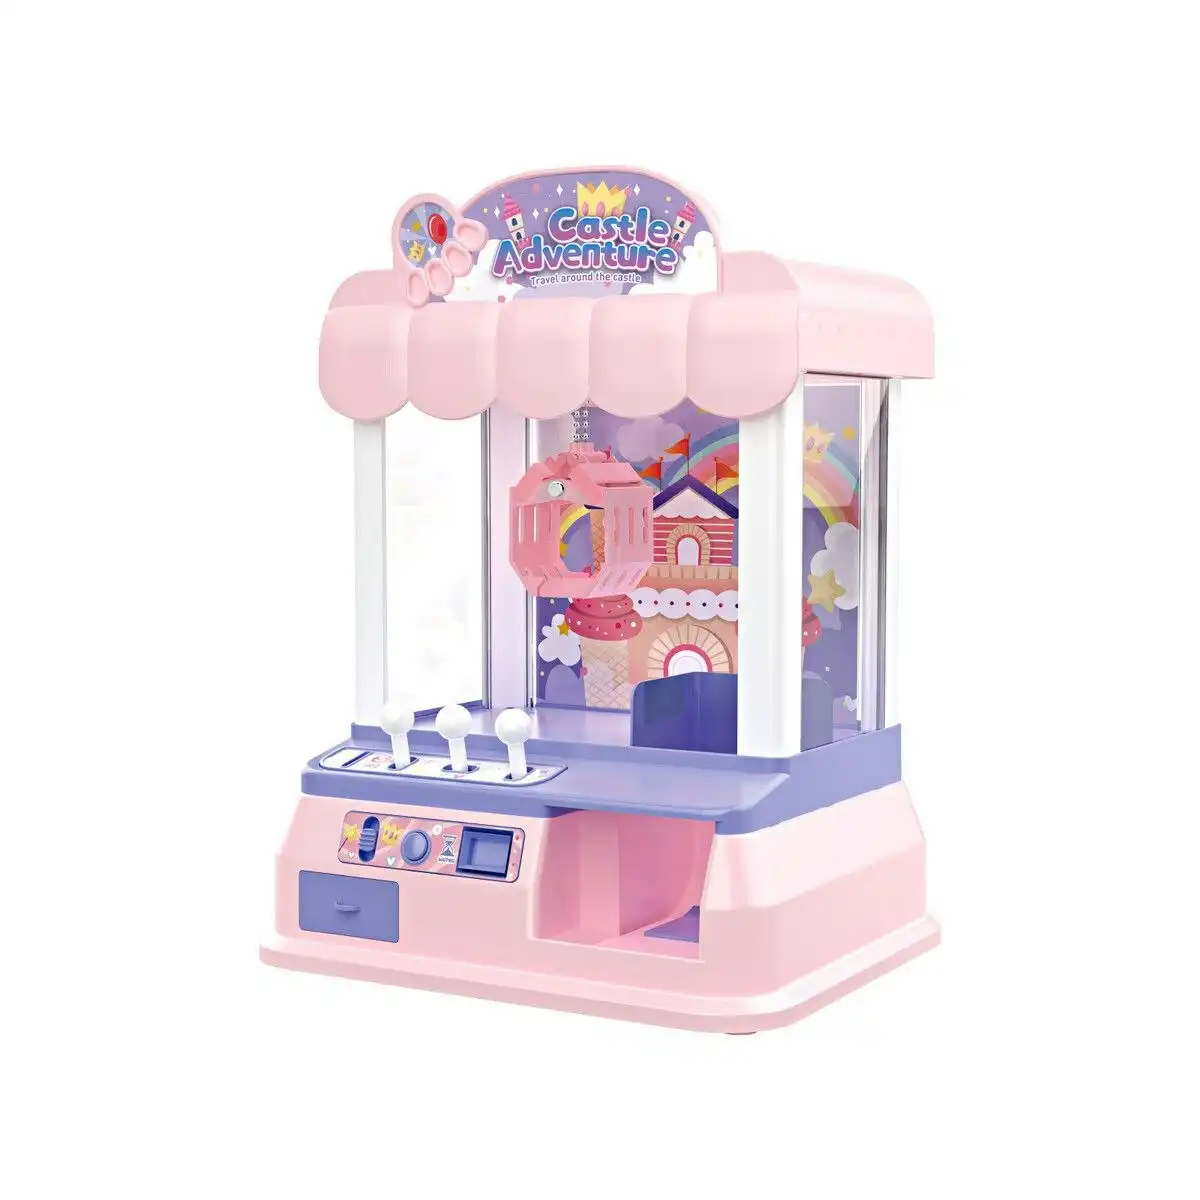 Ausway Mini Claw Machine Arcade Toy Grabber Candy Sweets Carnival Fair Gaming Party Birthday Xmas LED Light Animation Pink